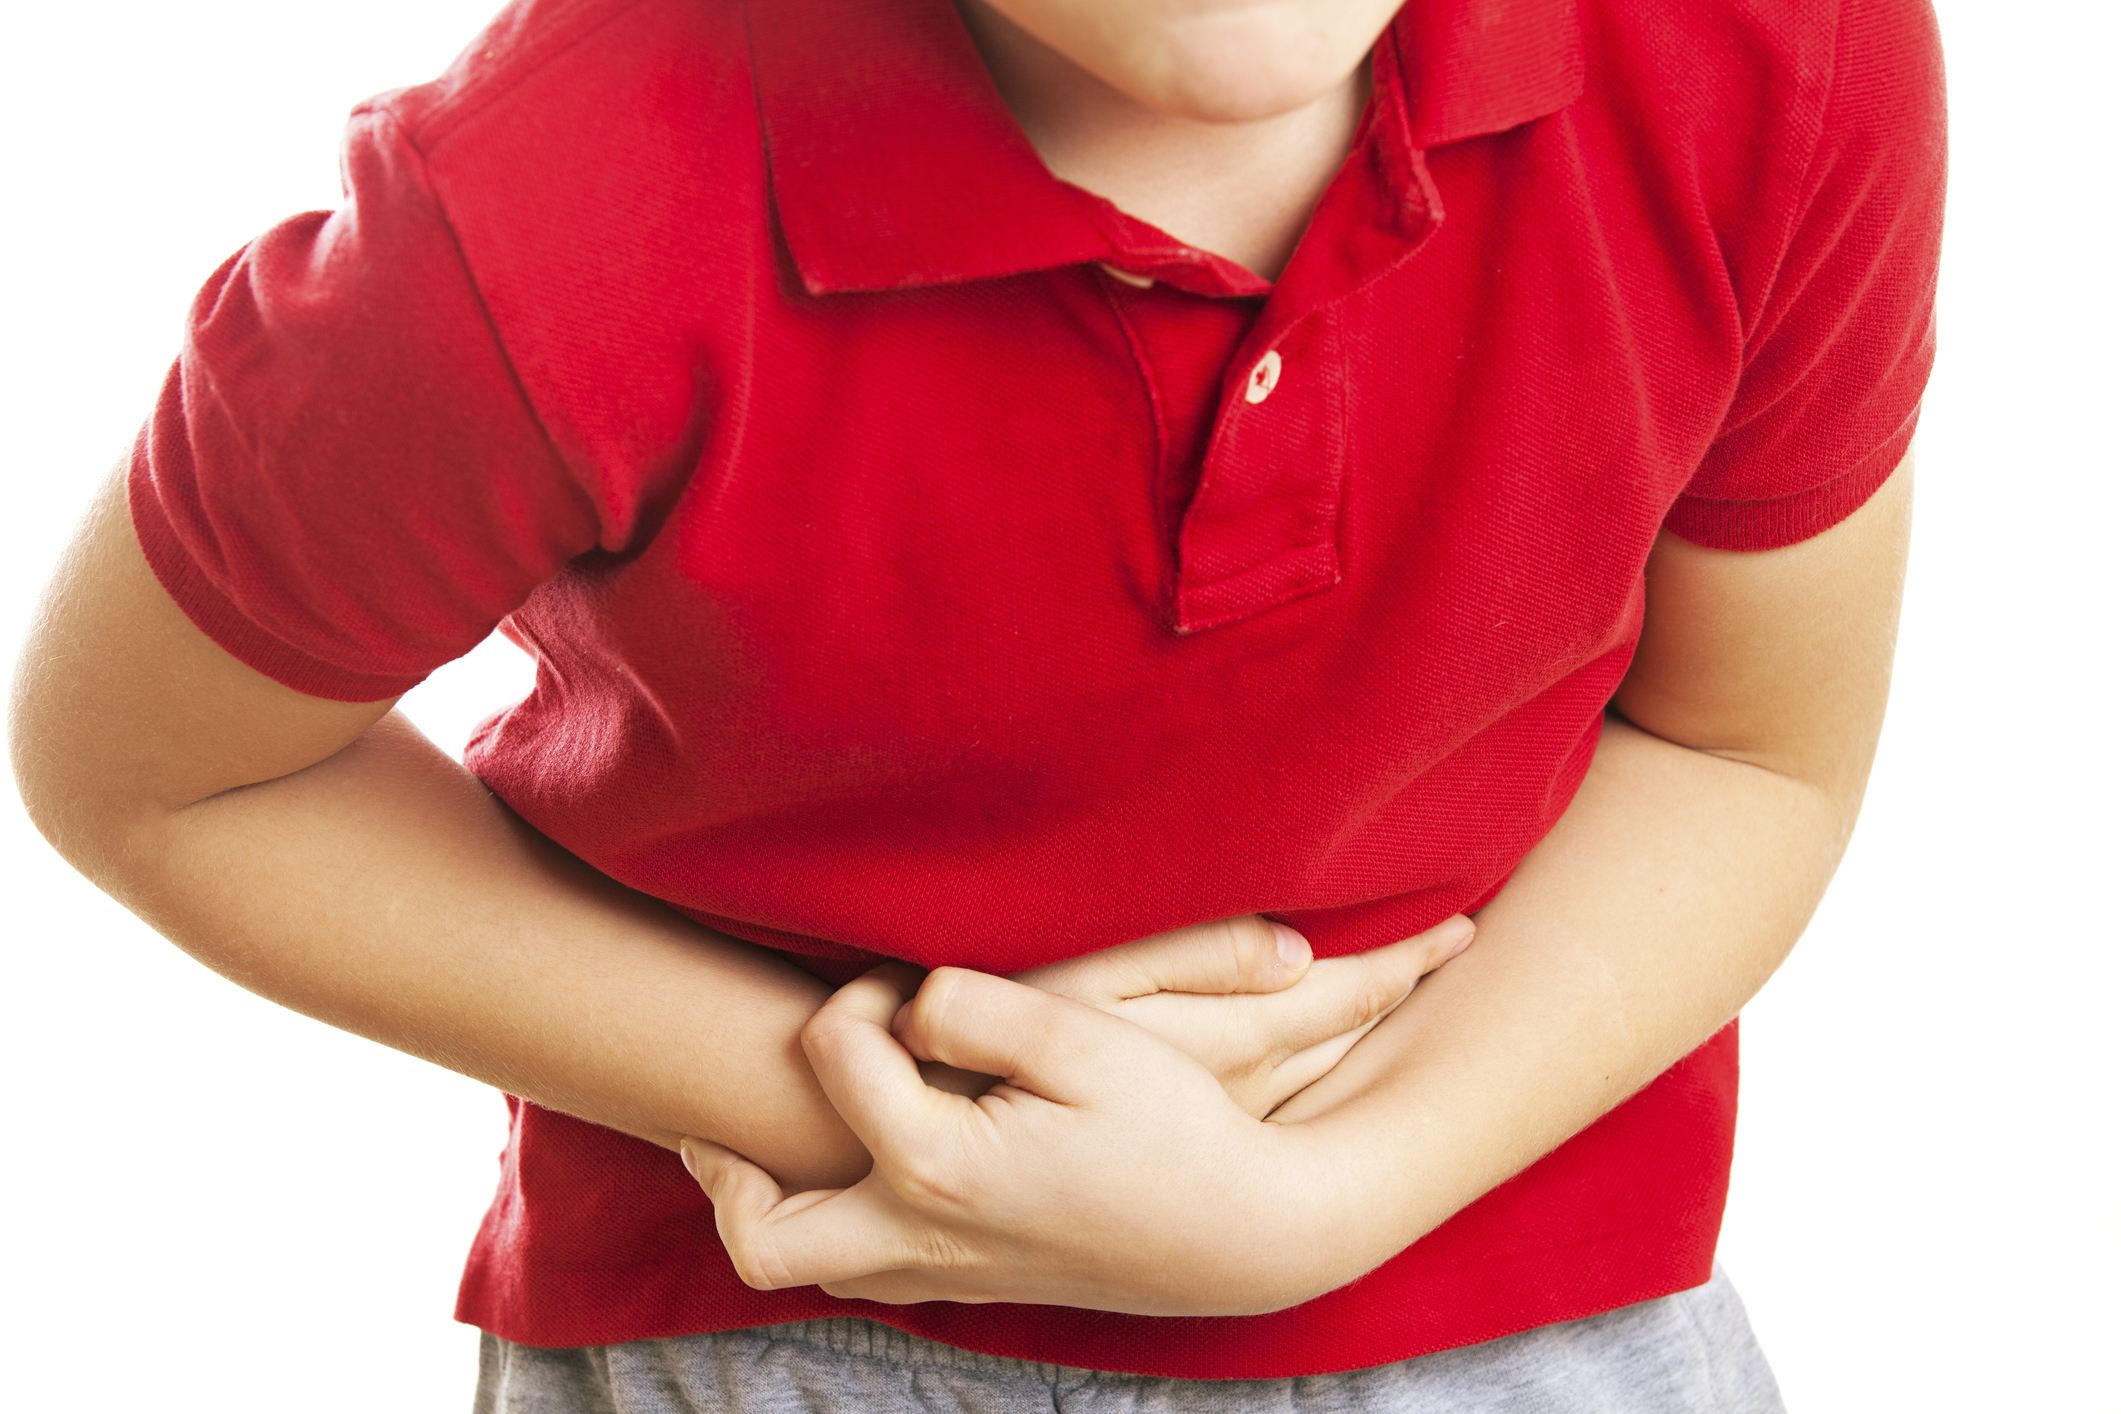 Child with stomach pain